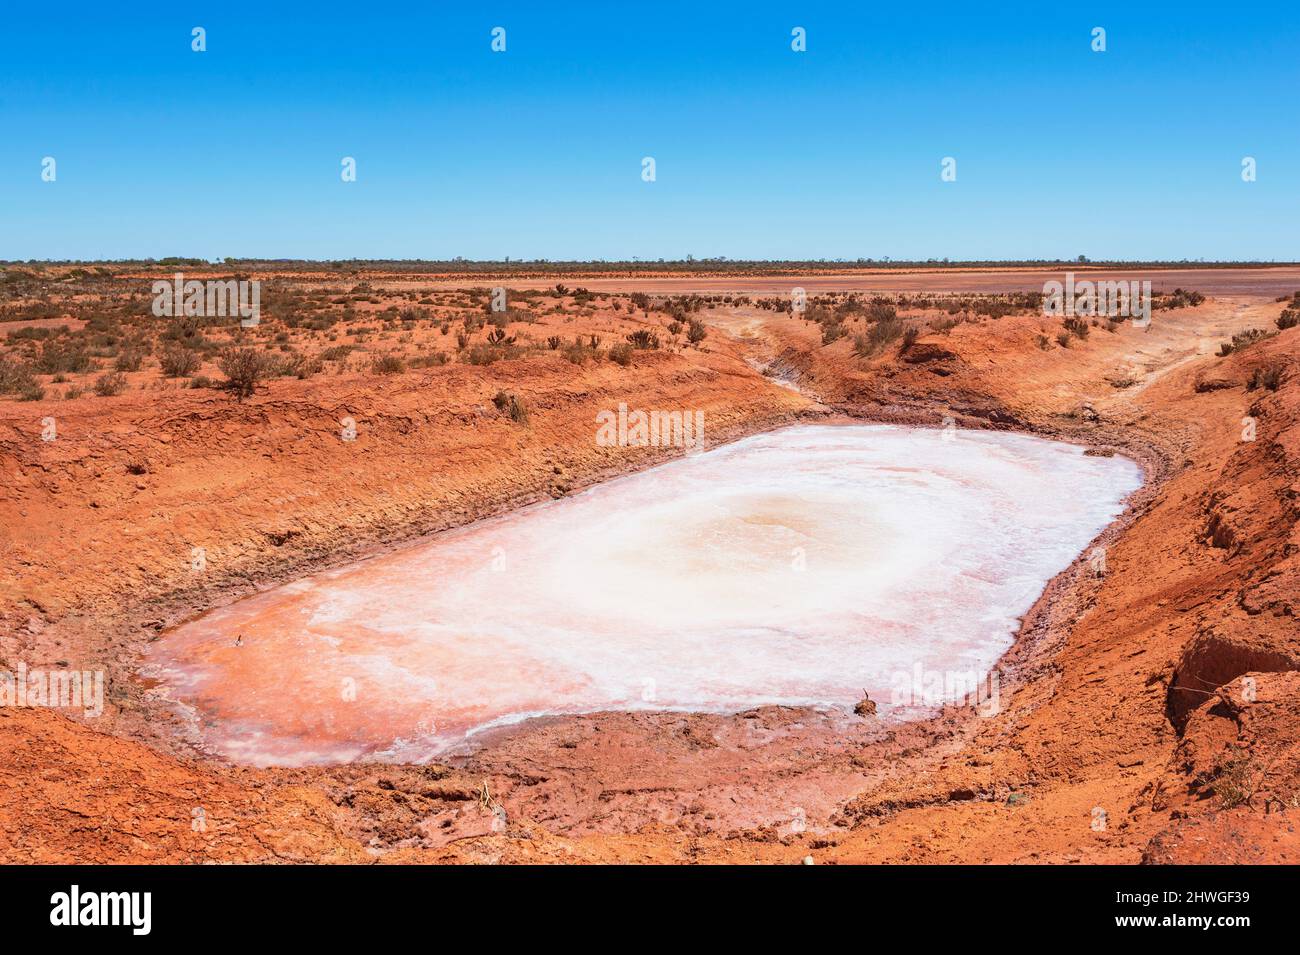 Salt in a drying up watering hole in the Australian Outback, Western Australia, WA, Australia Stock Photo